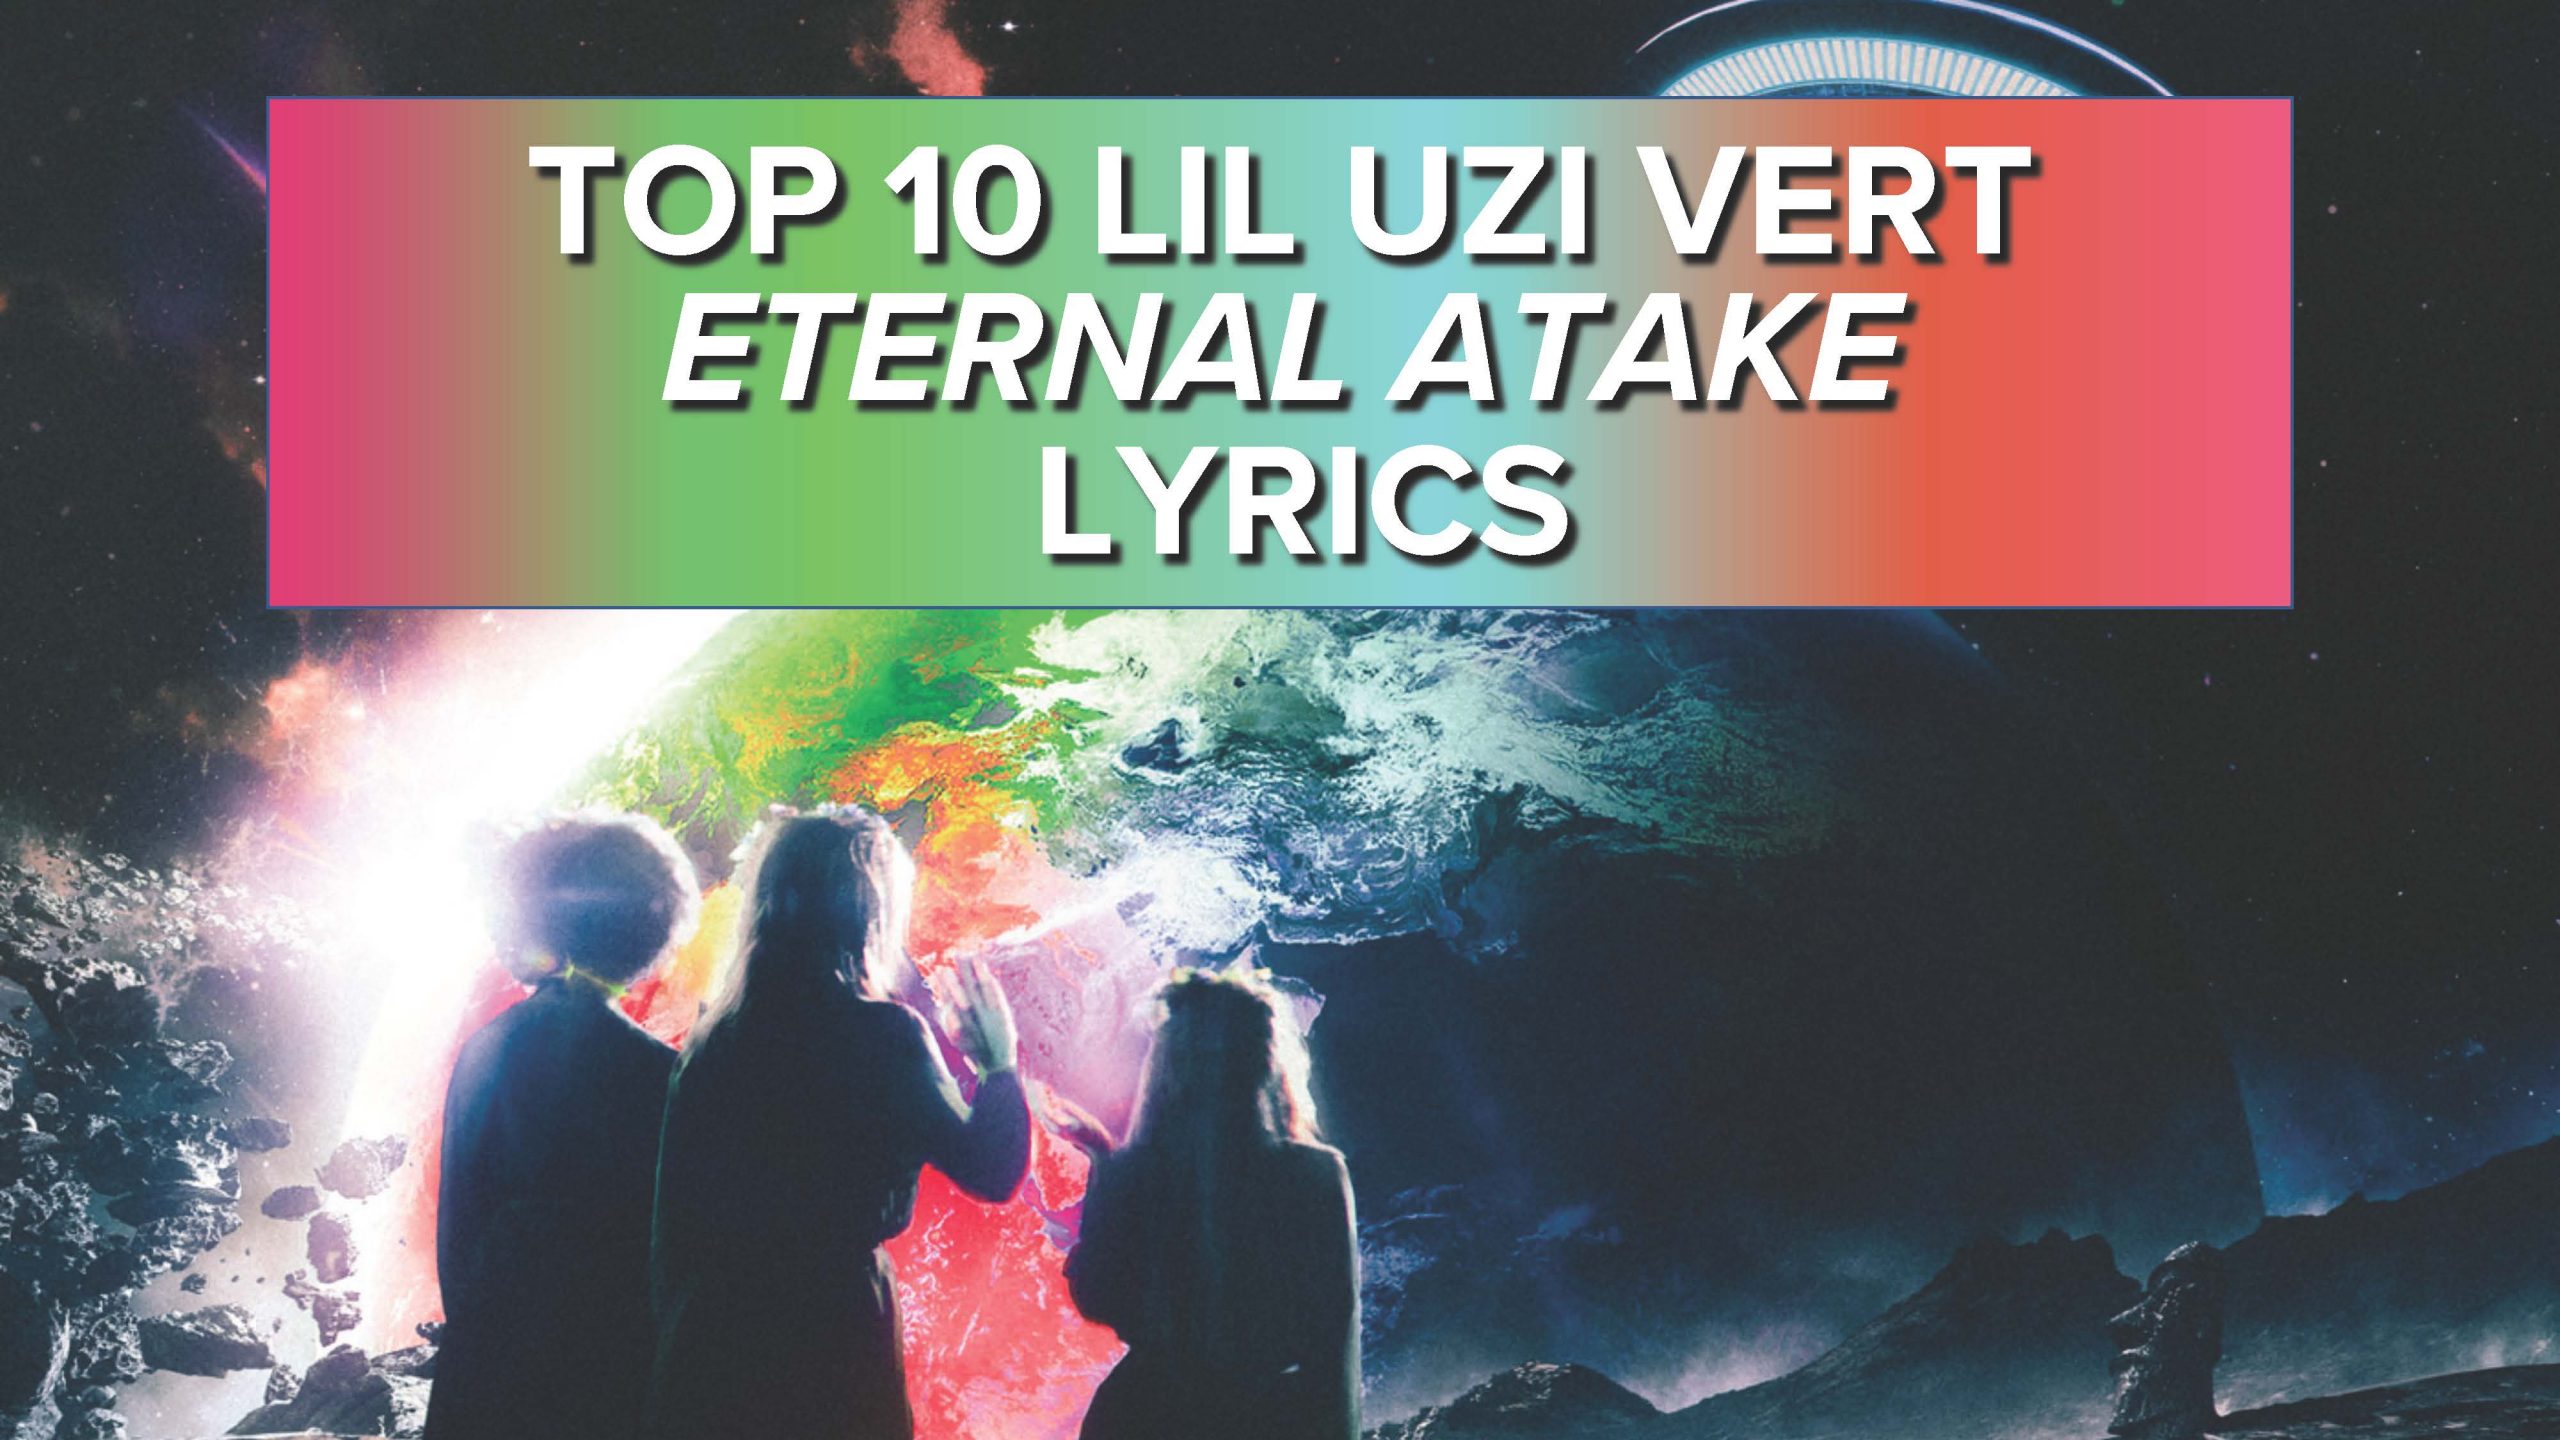 Top 10 Lil Uzi Vert Quotes From Eternal Atake Empire k